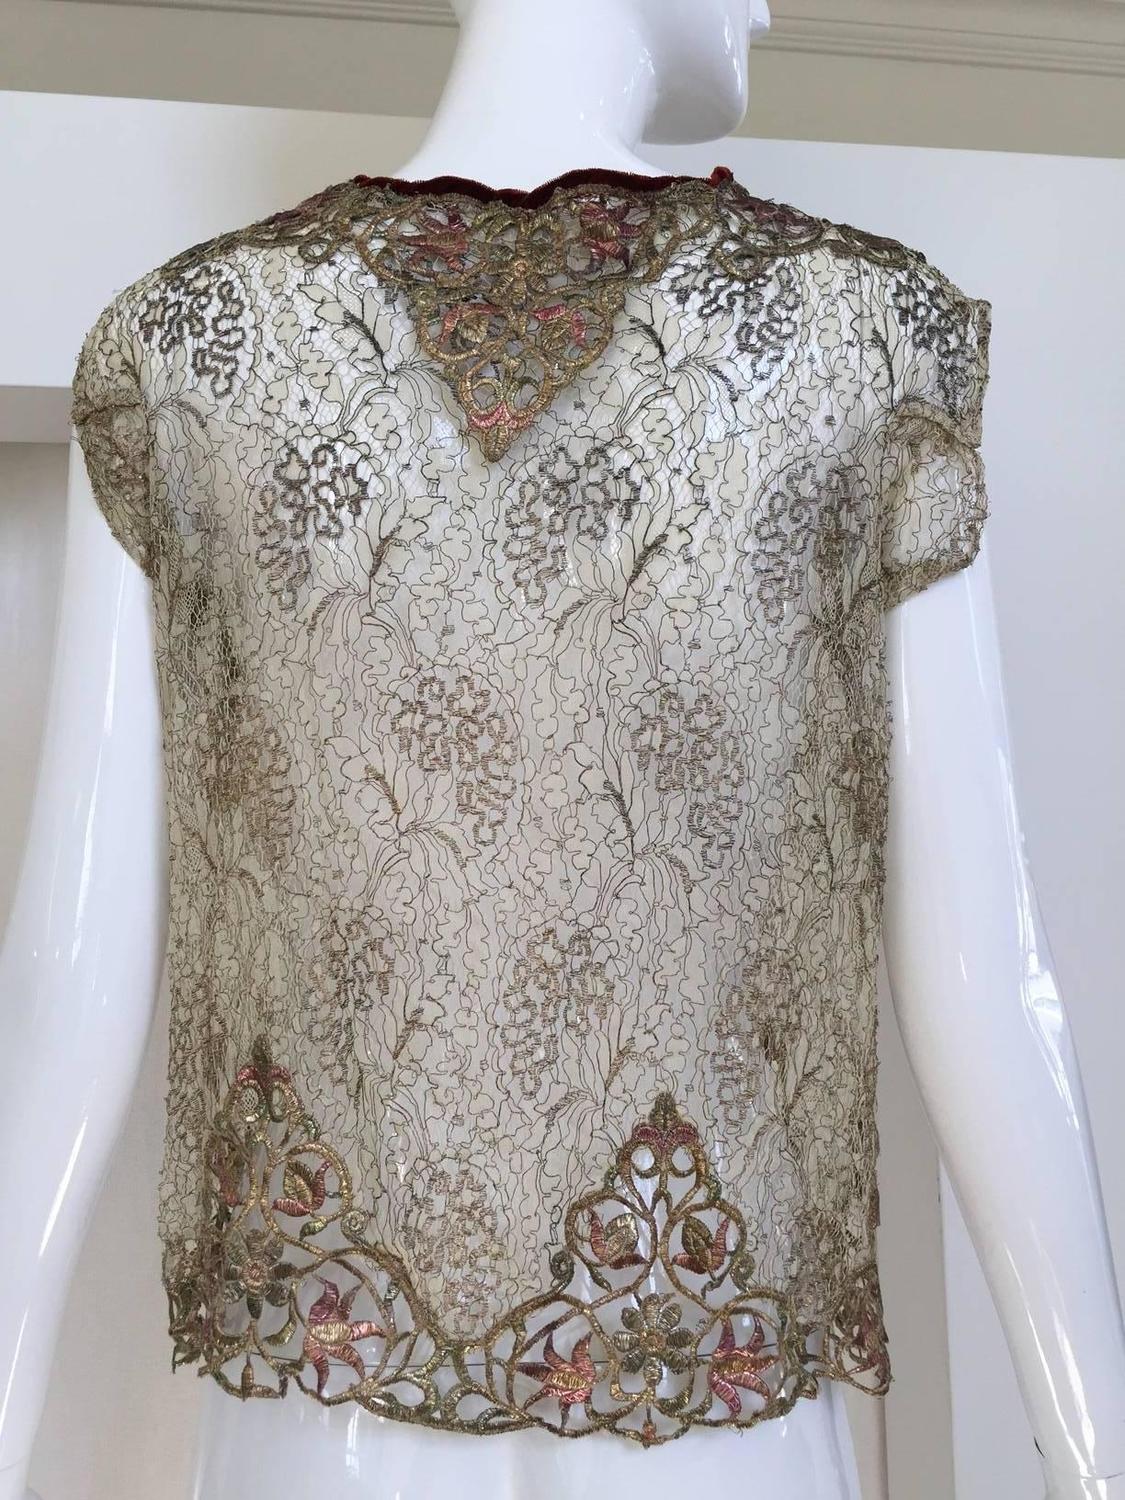 1920s gold embroidered lace blouse For Sale at 1stdibs